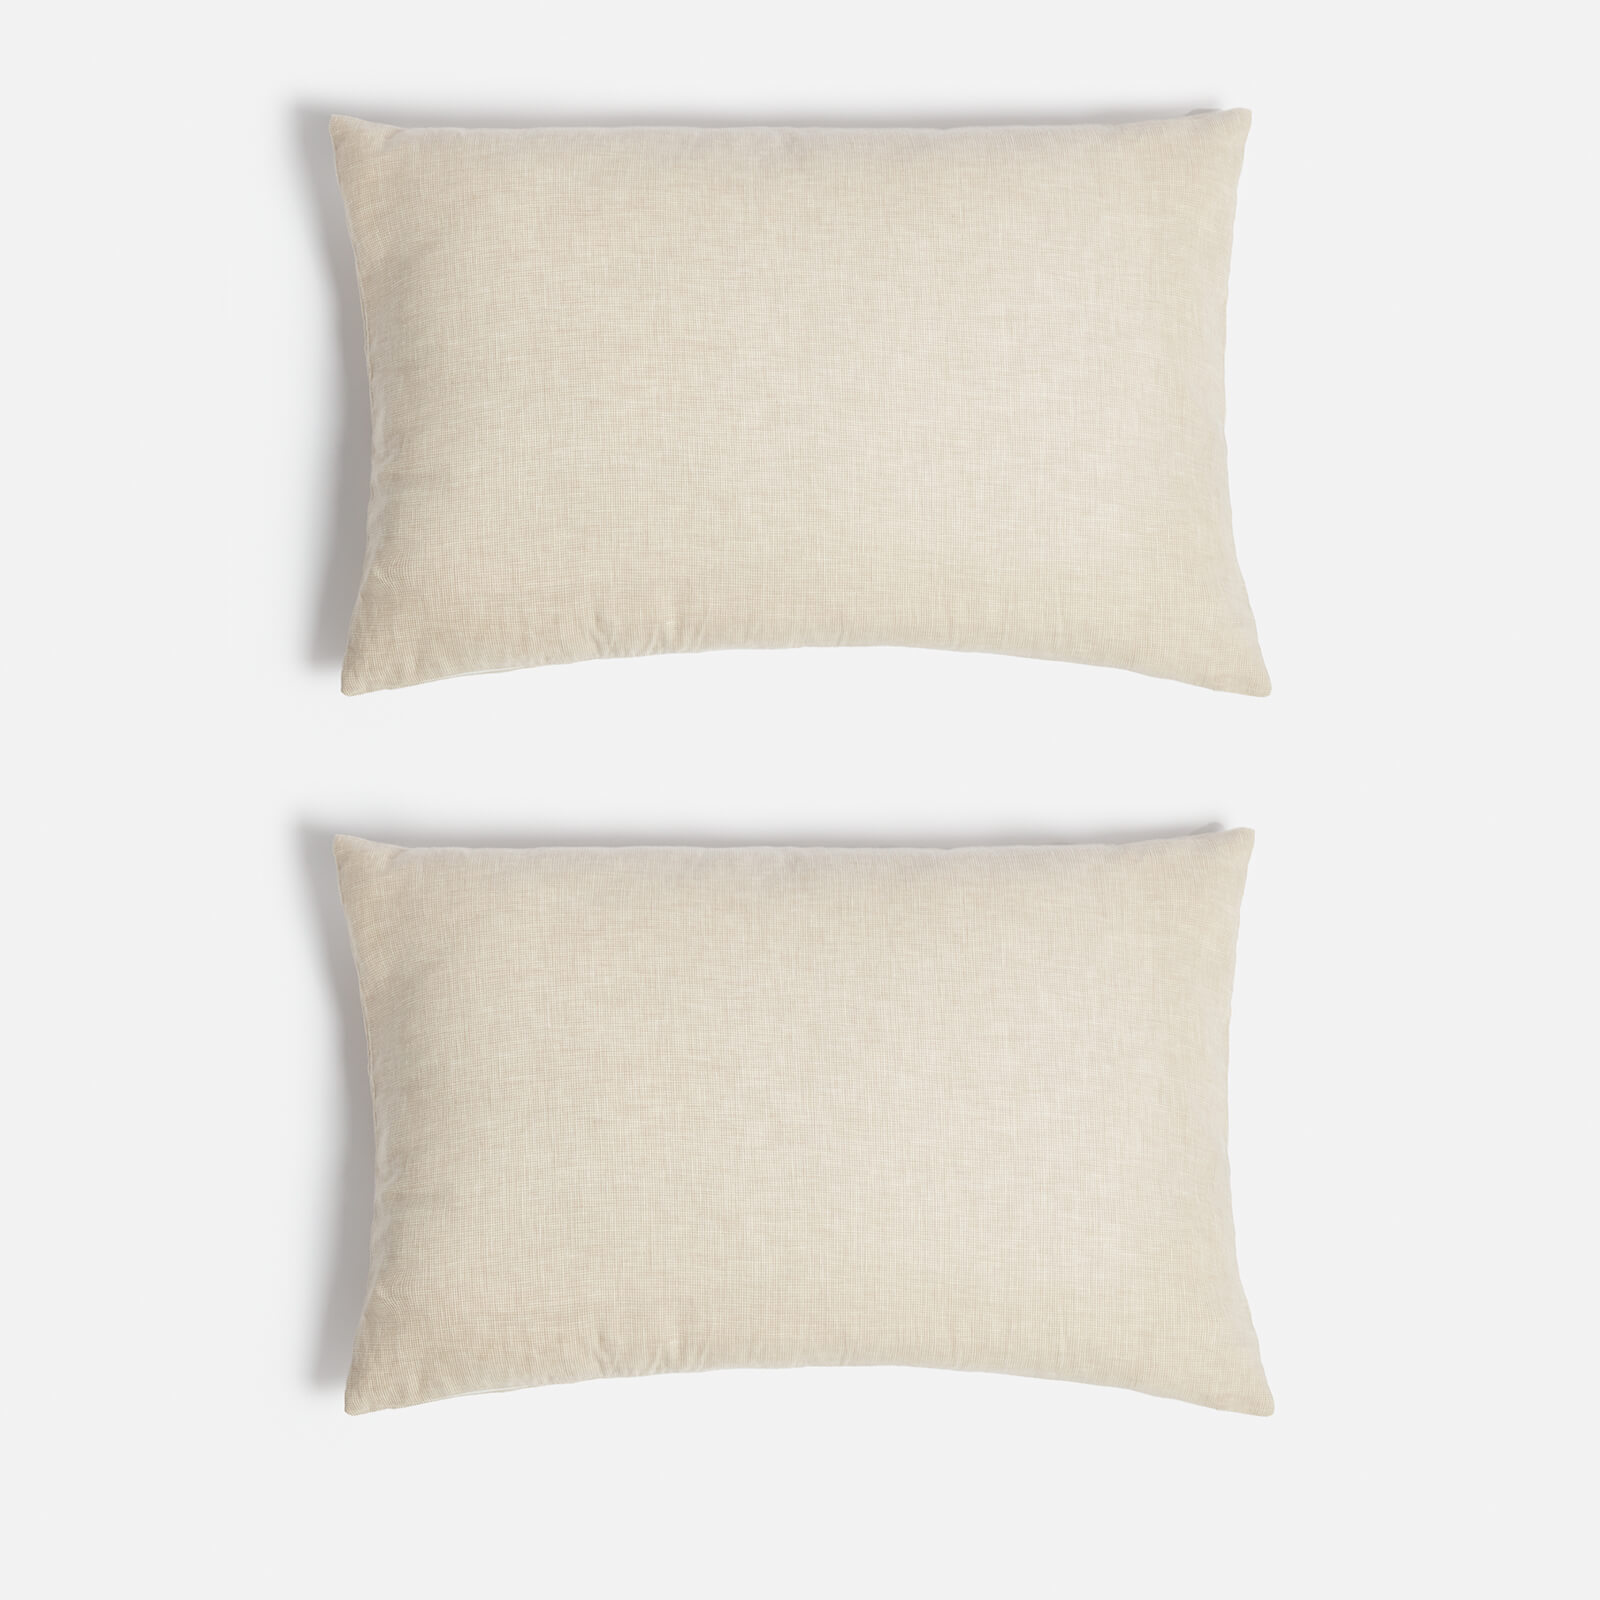 in home Linen Cotton Cushion Cover - Natural - 75x50cm - Set of 2